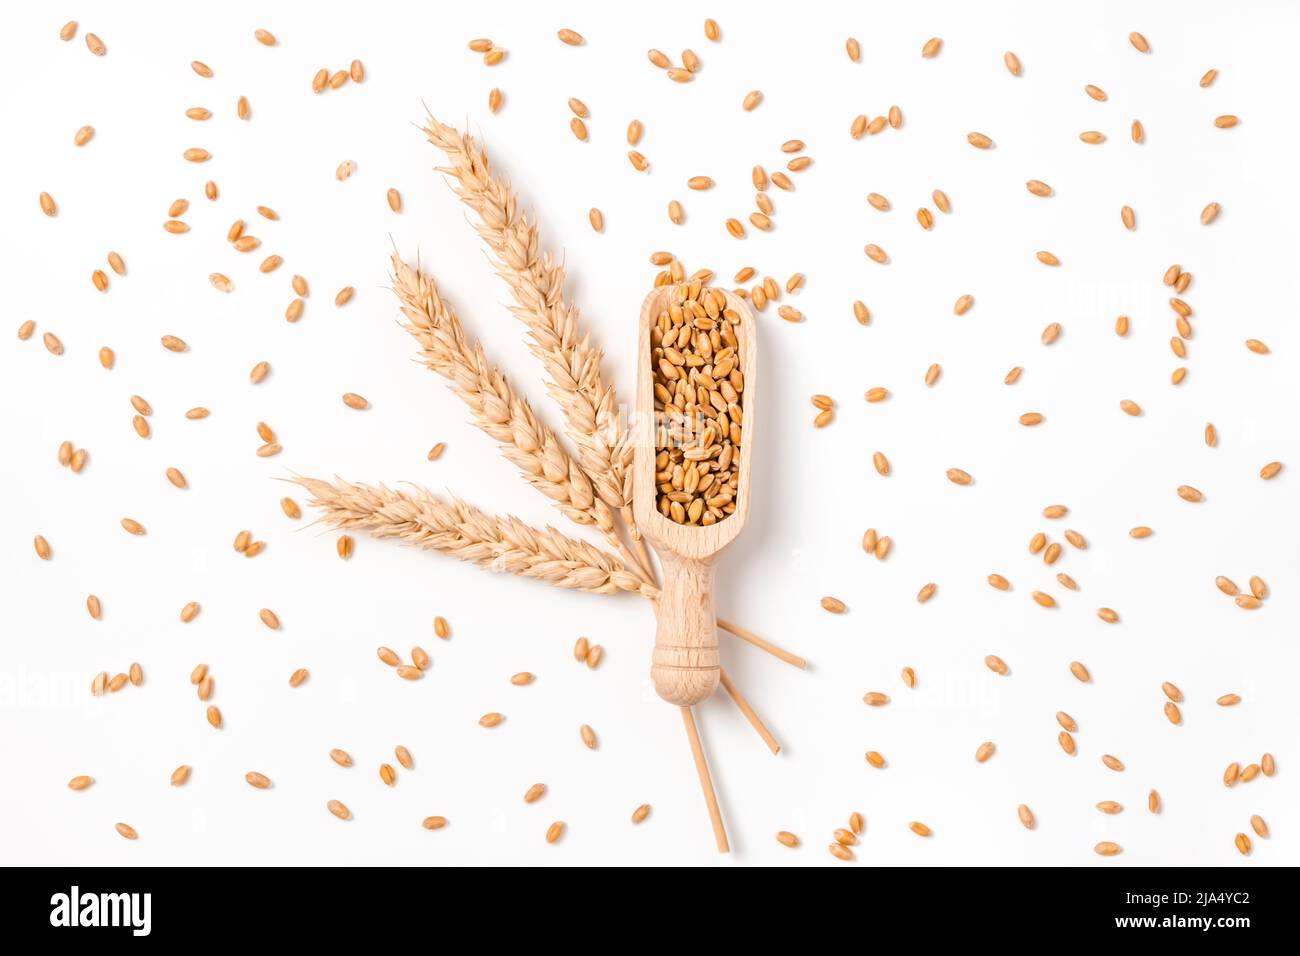 Wheat grain in wooden scoop, bundle of wheat spikes and scattered grains isolated on white. Concept of food supply and nutrients Stock Photo